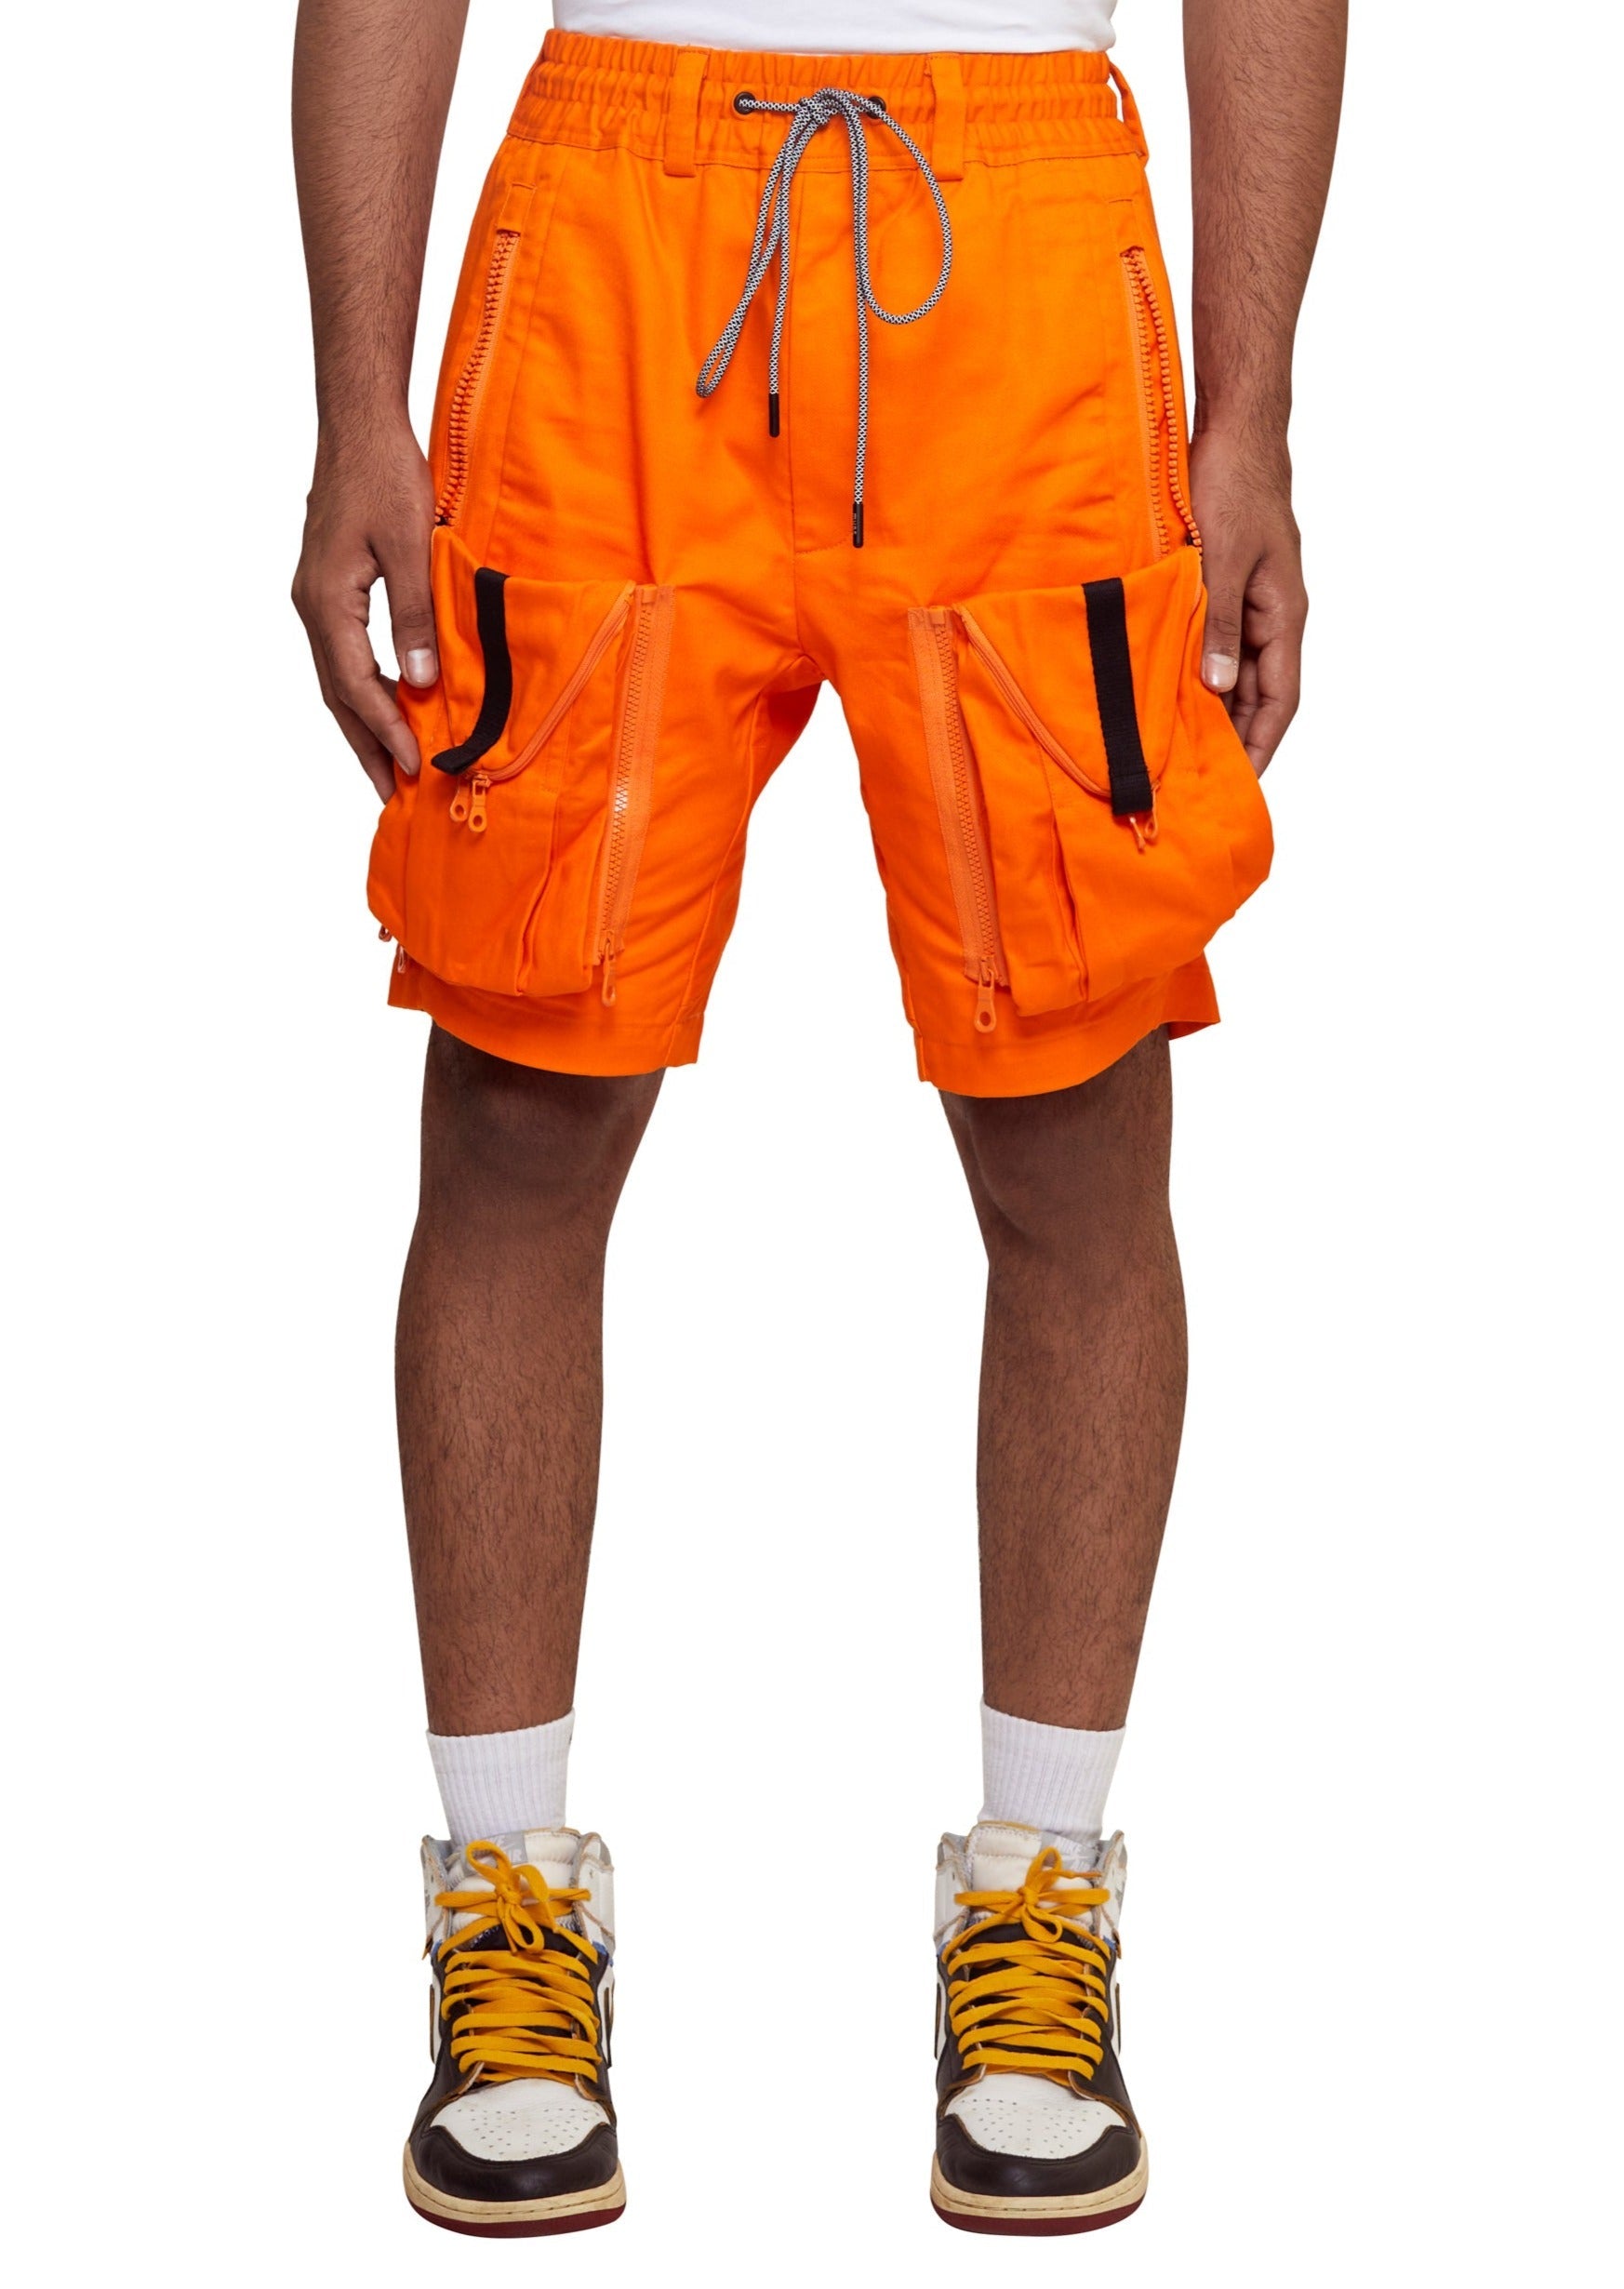 Orange cotton knee-lengh Zipoff Cargo Shorts from the brand Mostly Heard Rarely Seen